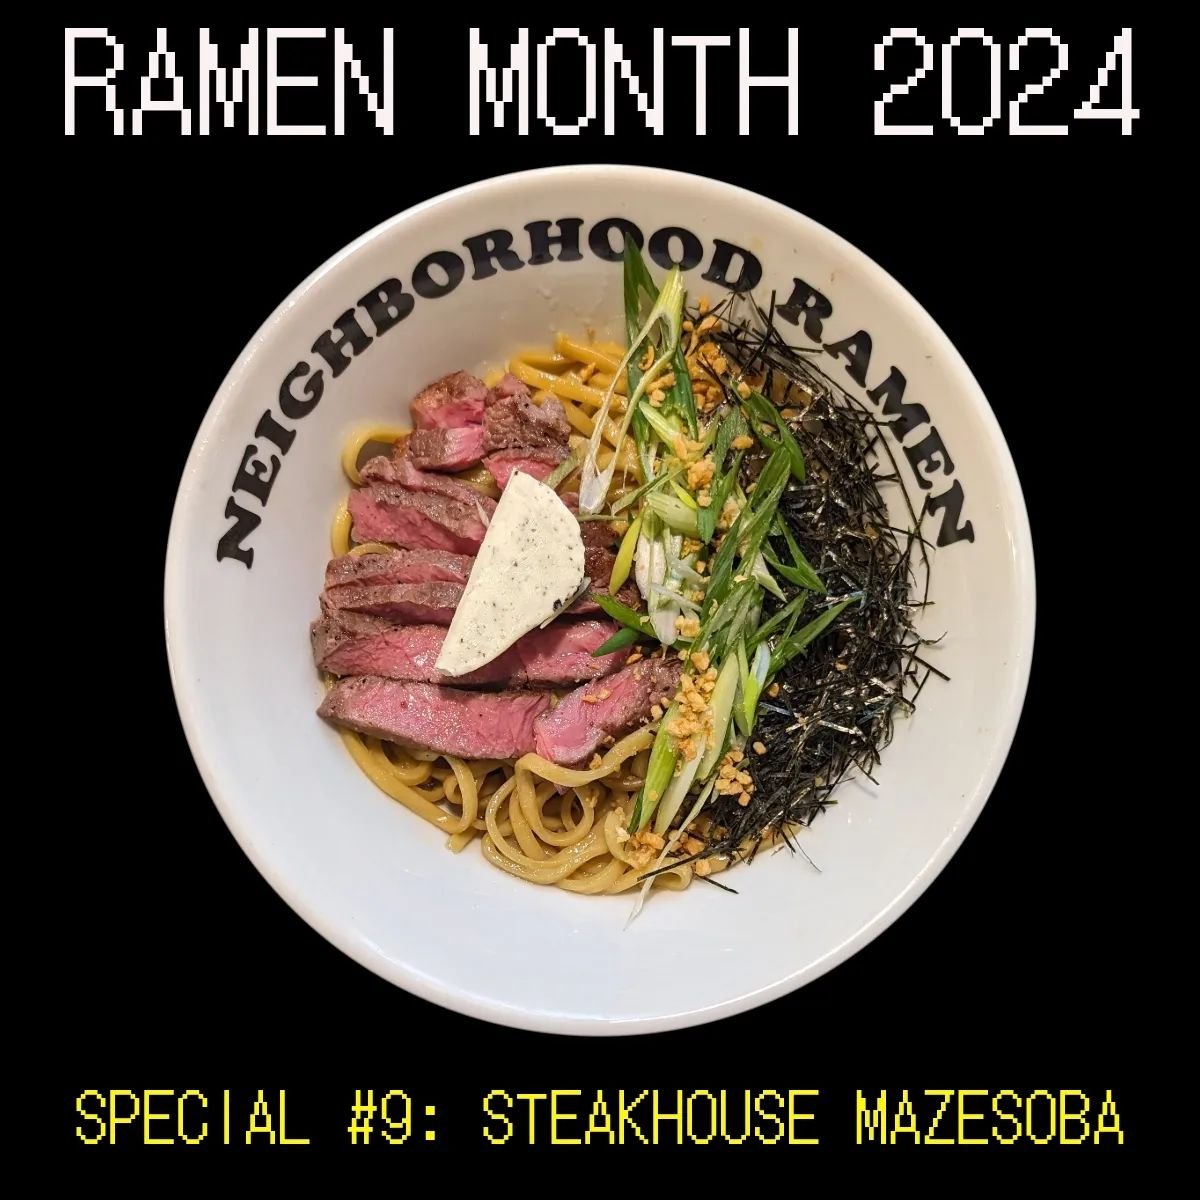 4/21 Special 9 of #ramenmonth was Steakhouse Mazesoba.
Inspired by @ikinaristeak_hakodatetokura
Our house-made mazesoba noodles tossed in shoyu tare and beef fat, seared NY strip, negi, kizaminori, fried garlic and nori compound butter 

Rich. Decade